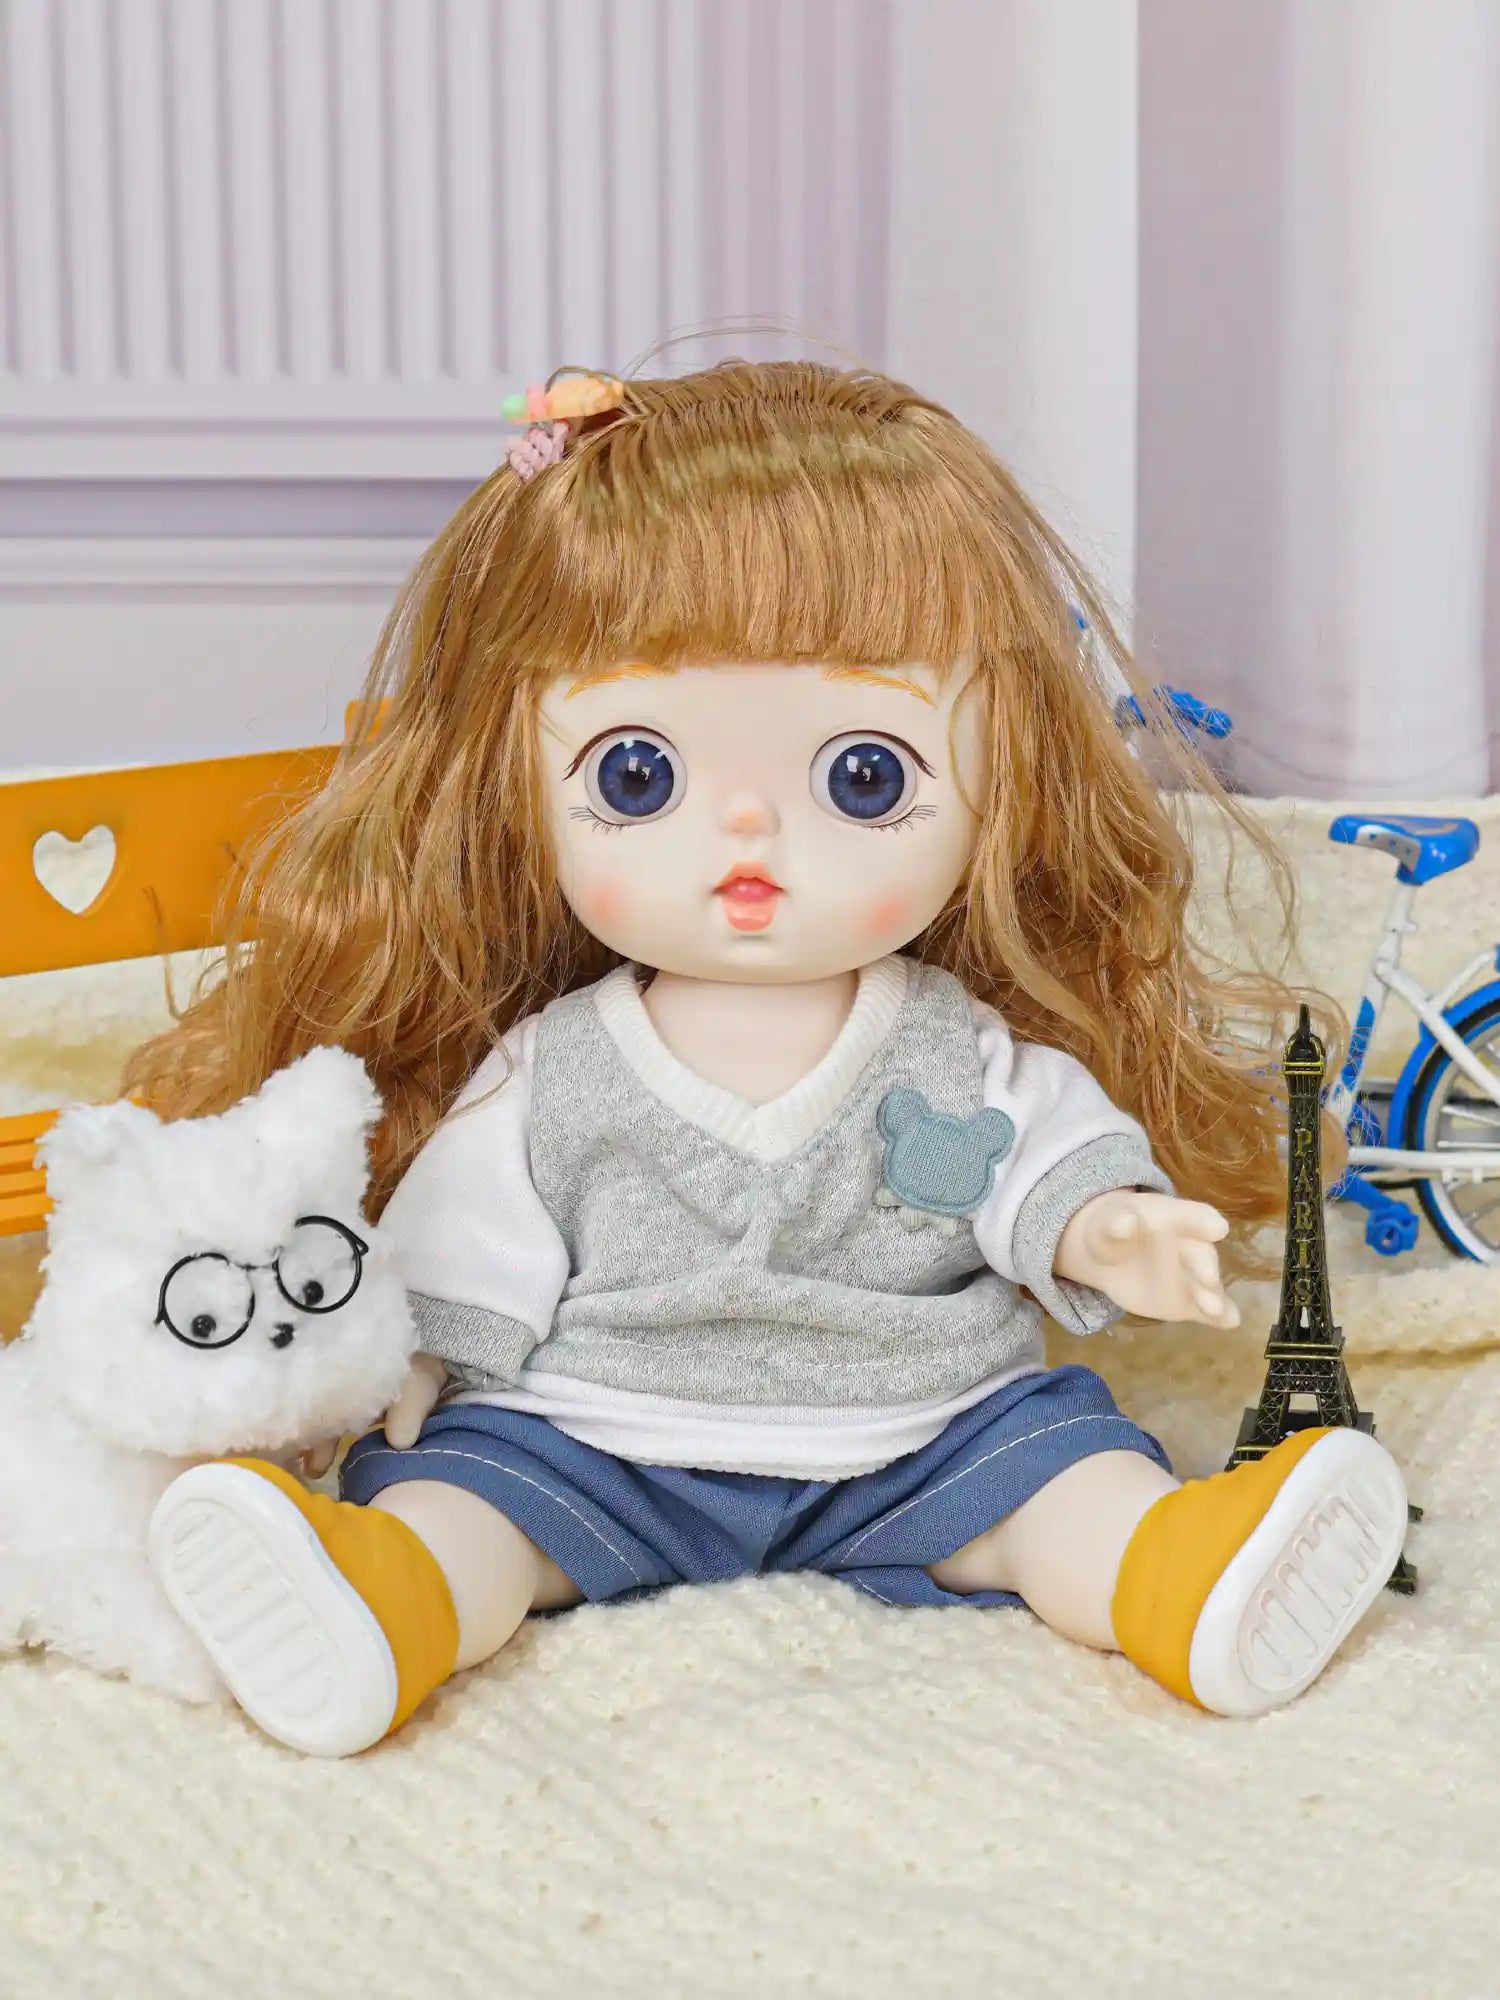 A toy doll with expressive features paired with a white fluffy dog wearing round spectacles, in a playroom setting.